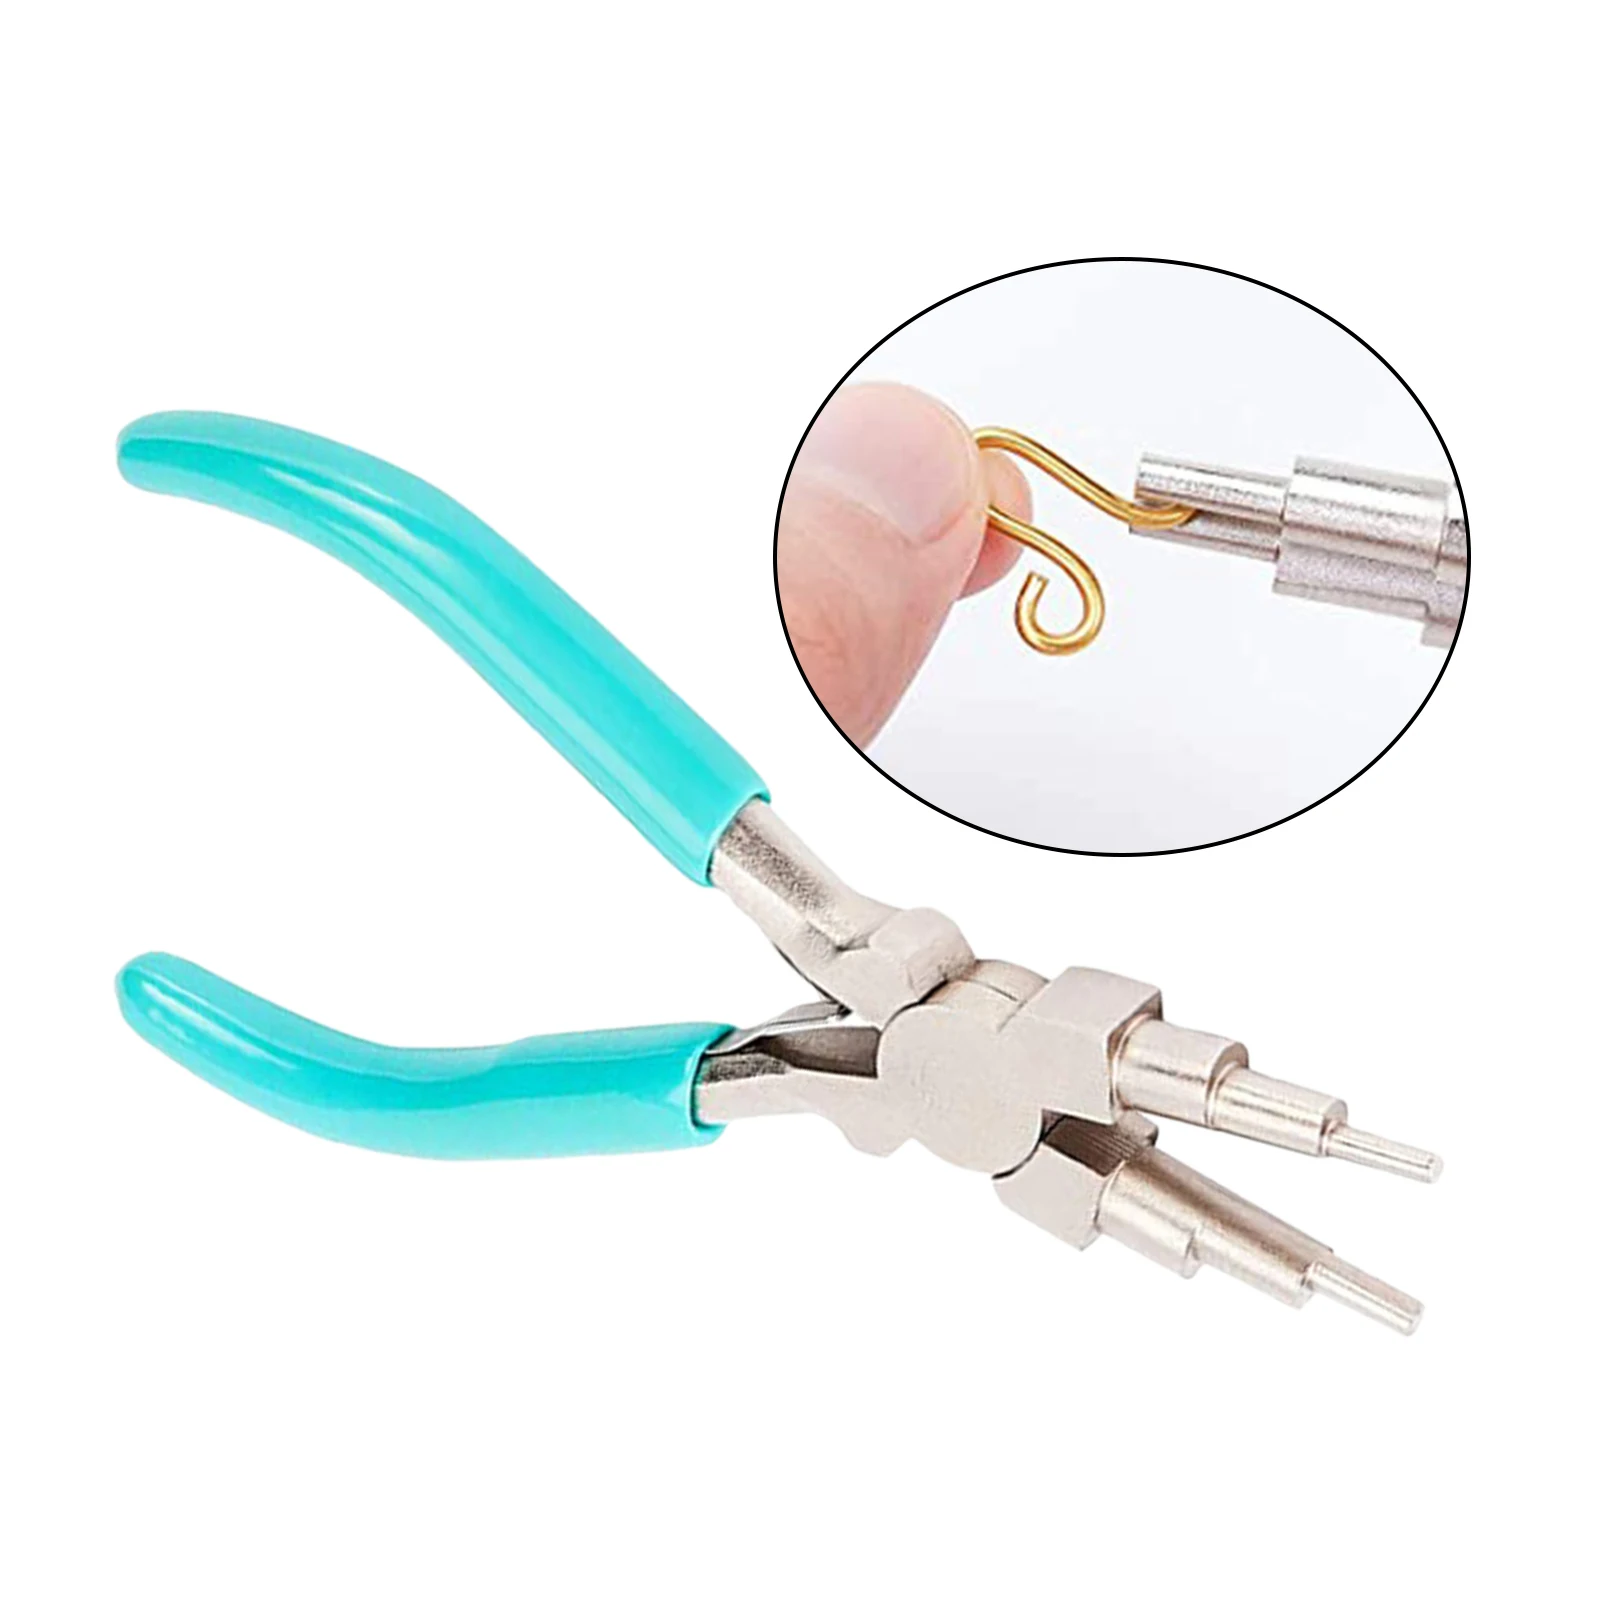 

6 in 1 Bail Making Pliers with Non-Slip Comfort Grip Handle Wire Looping Forming Pliers Jewelry Making Tool Supplies